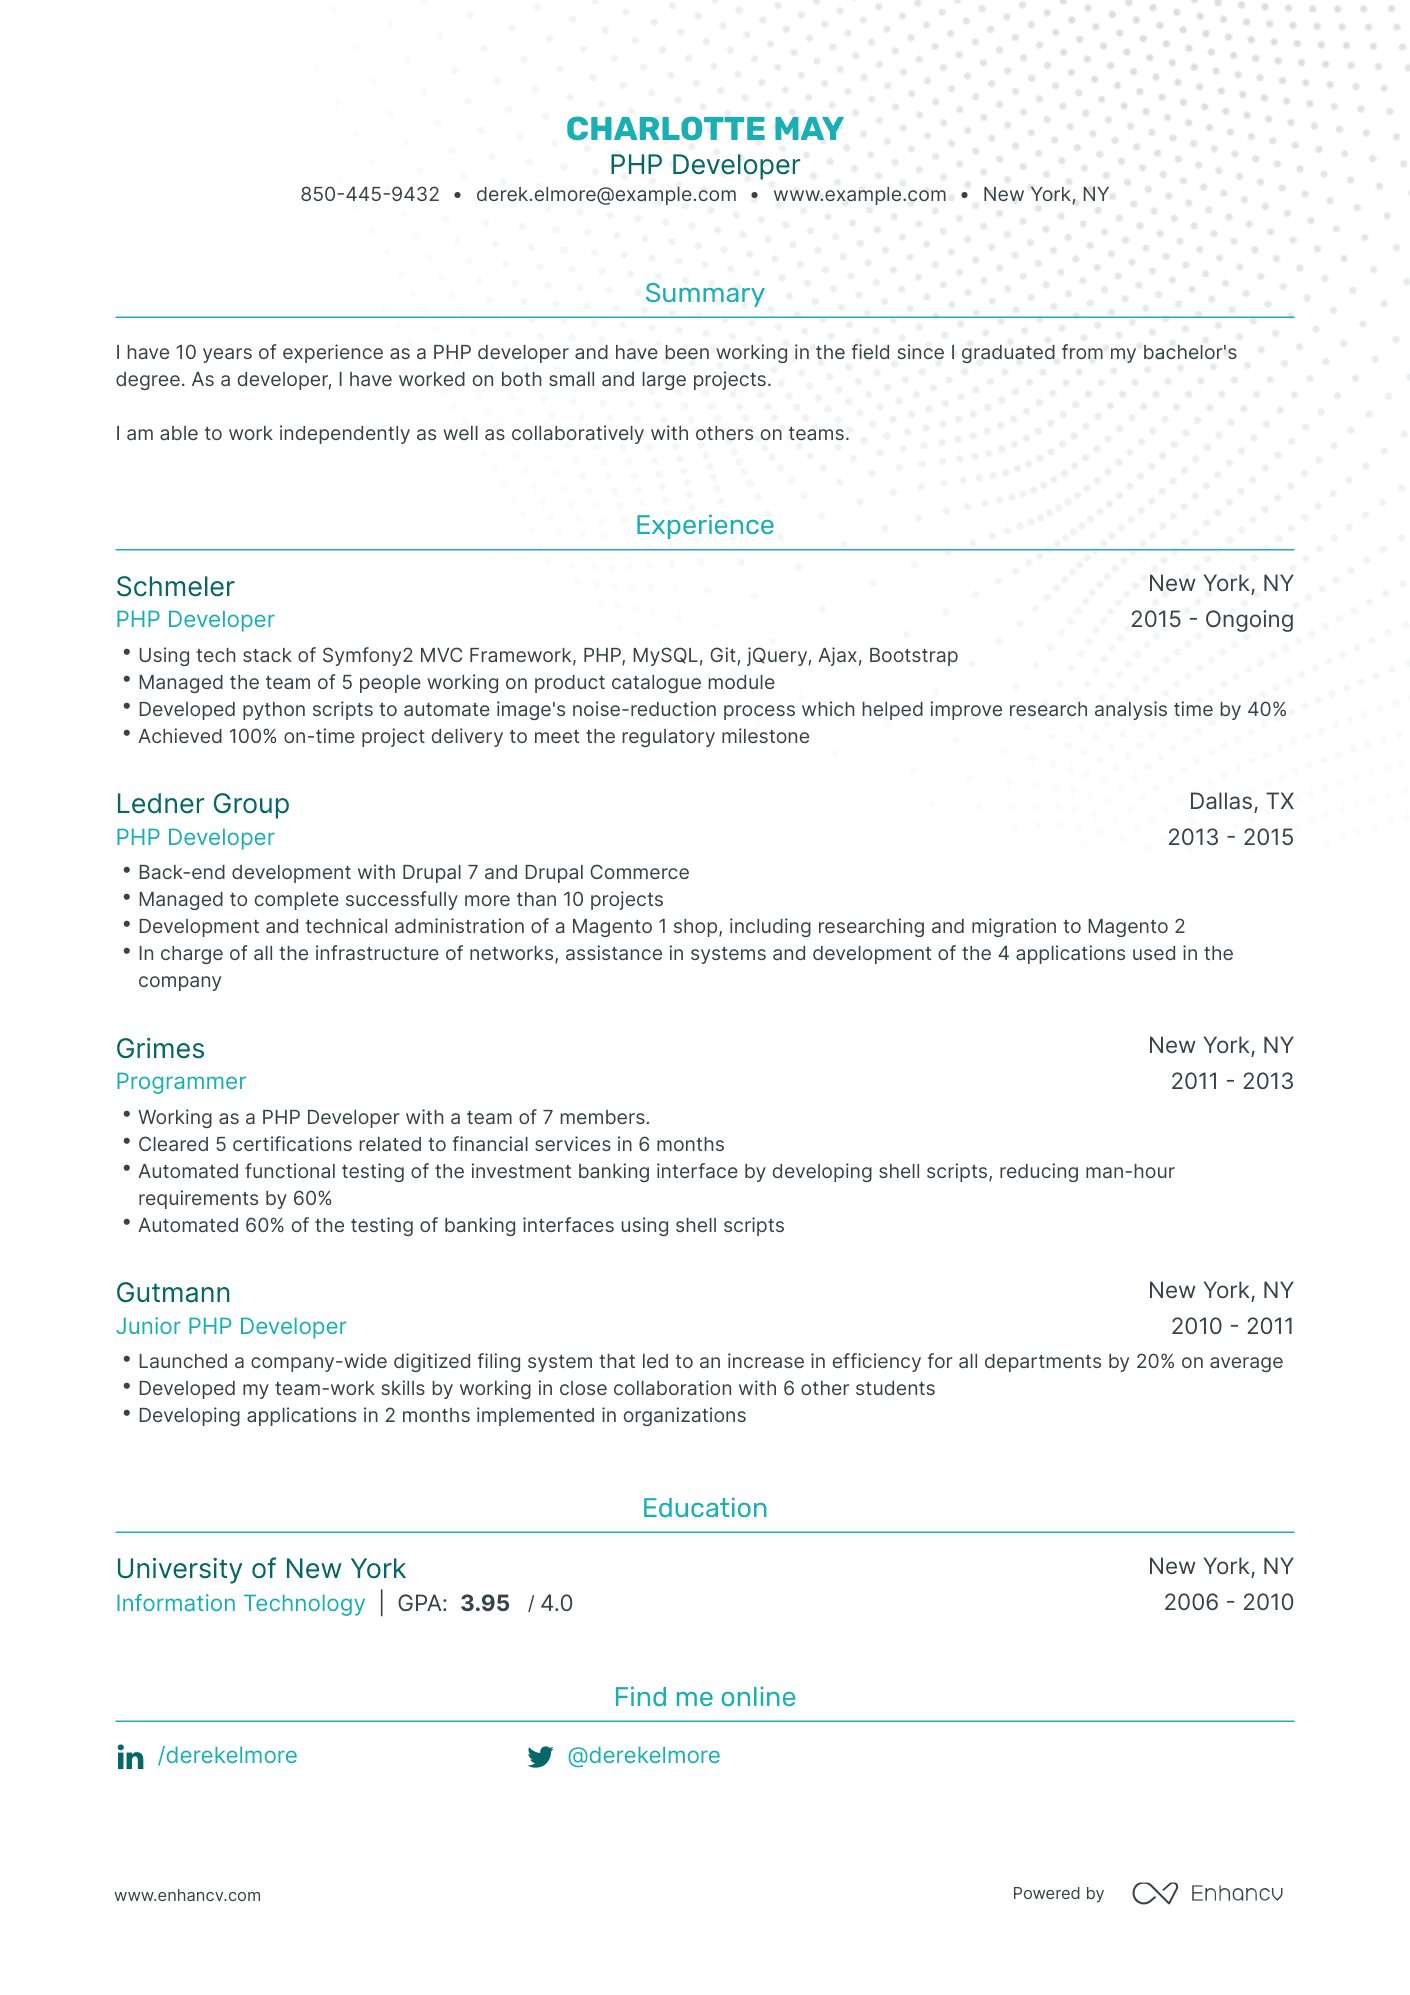 Traditional PHP Developer Resume Template